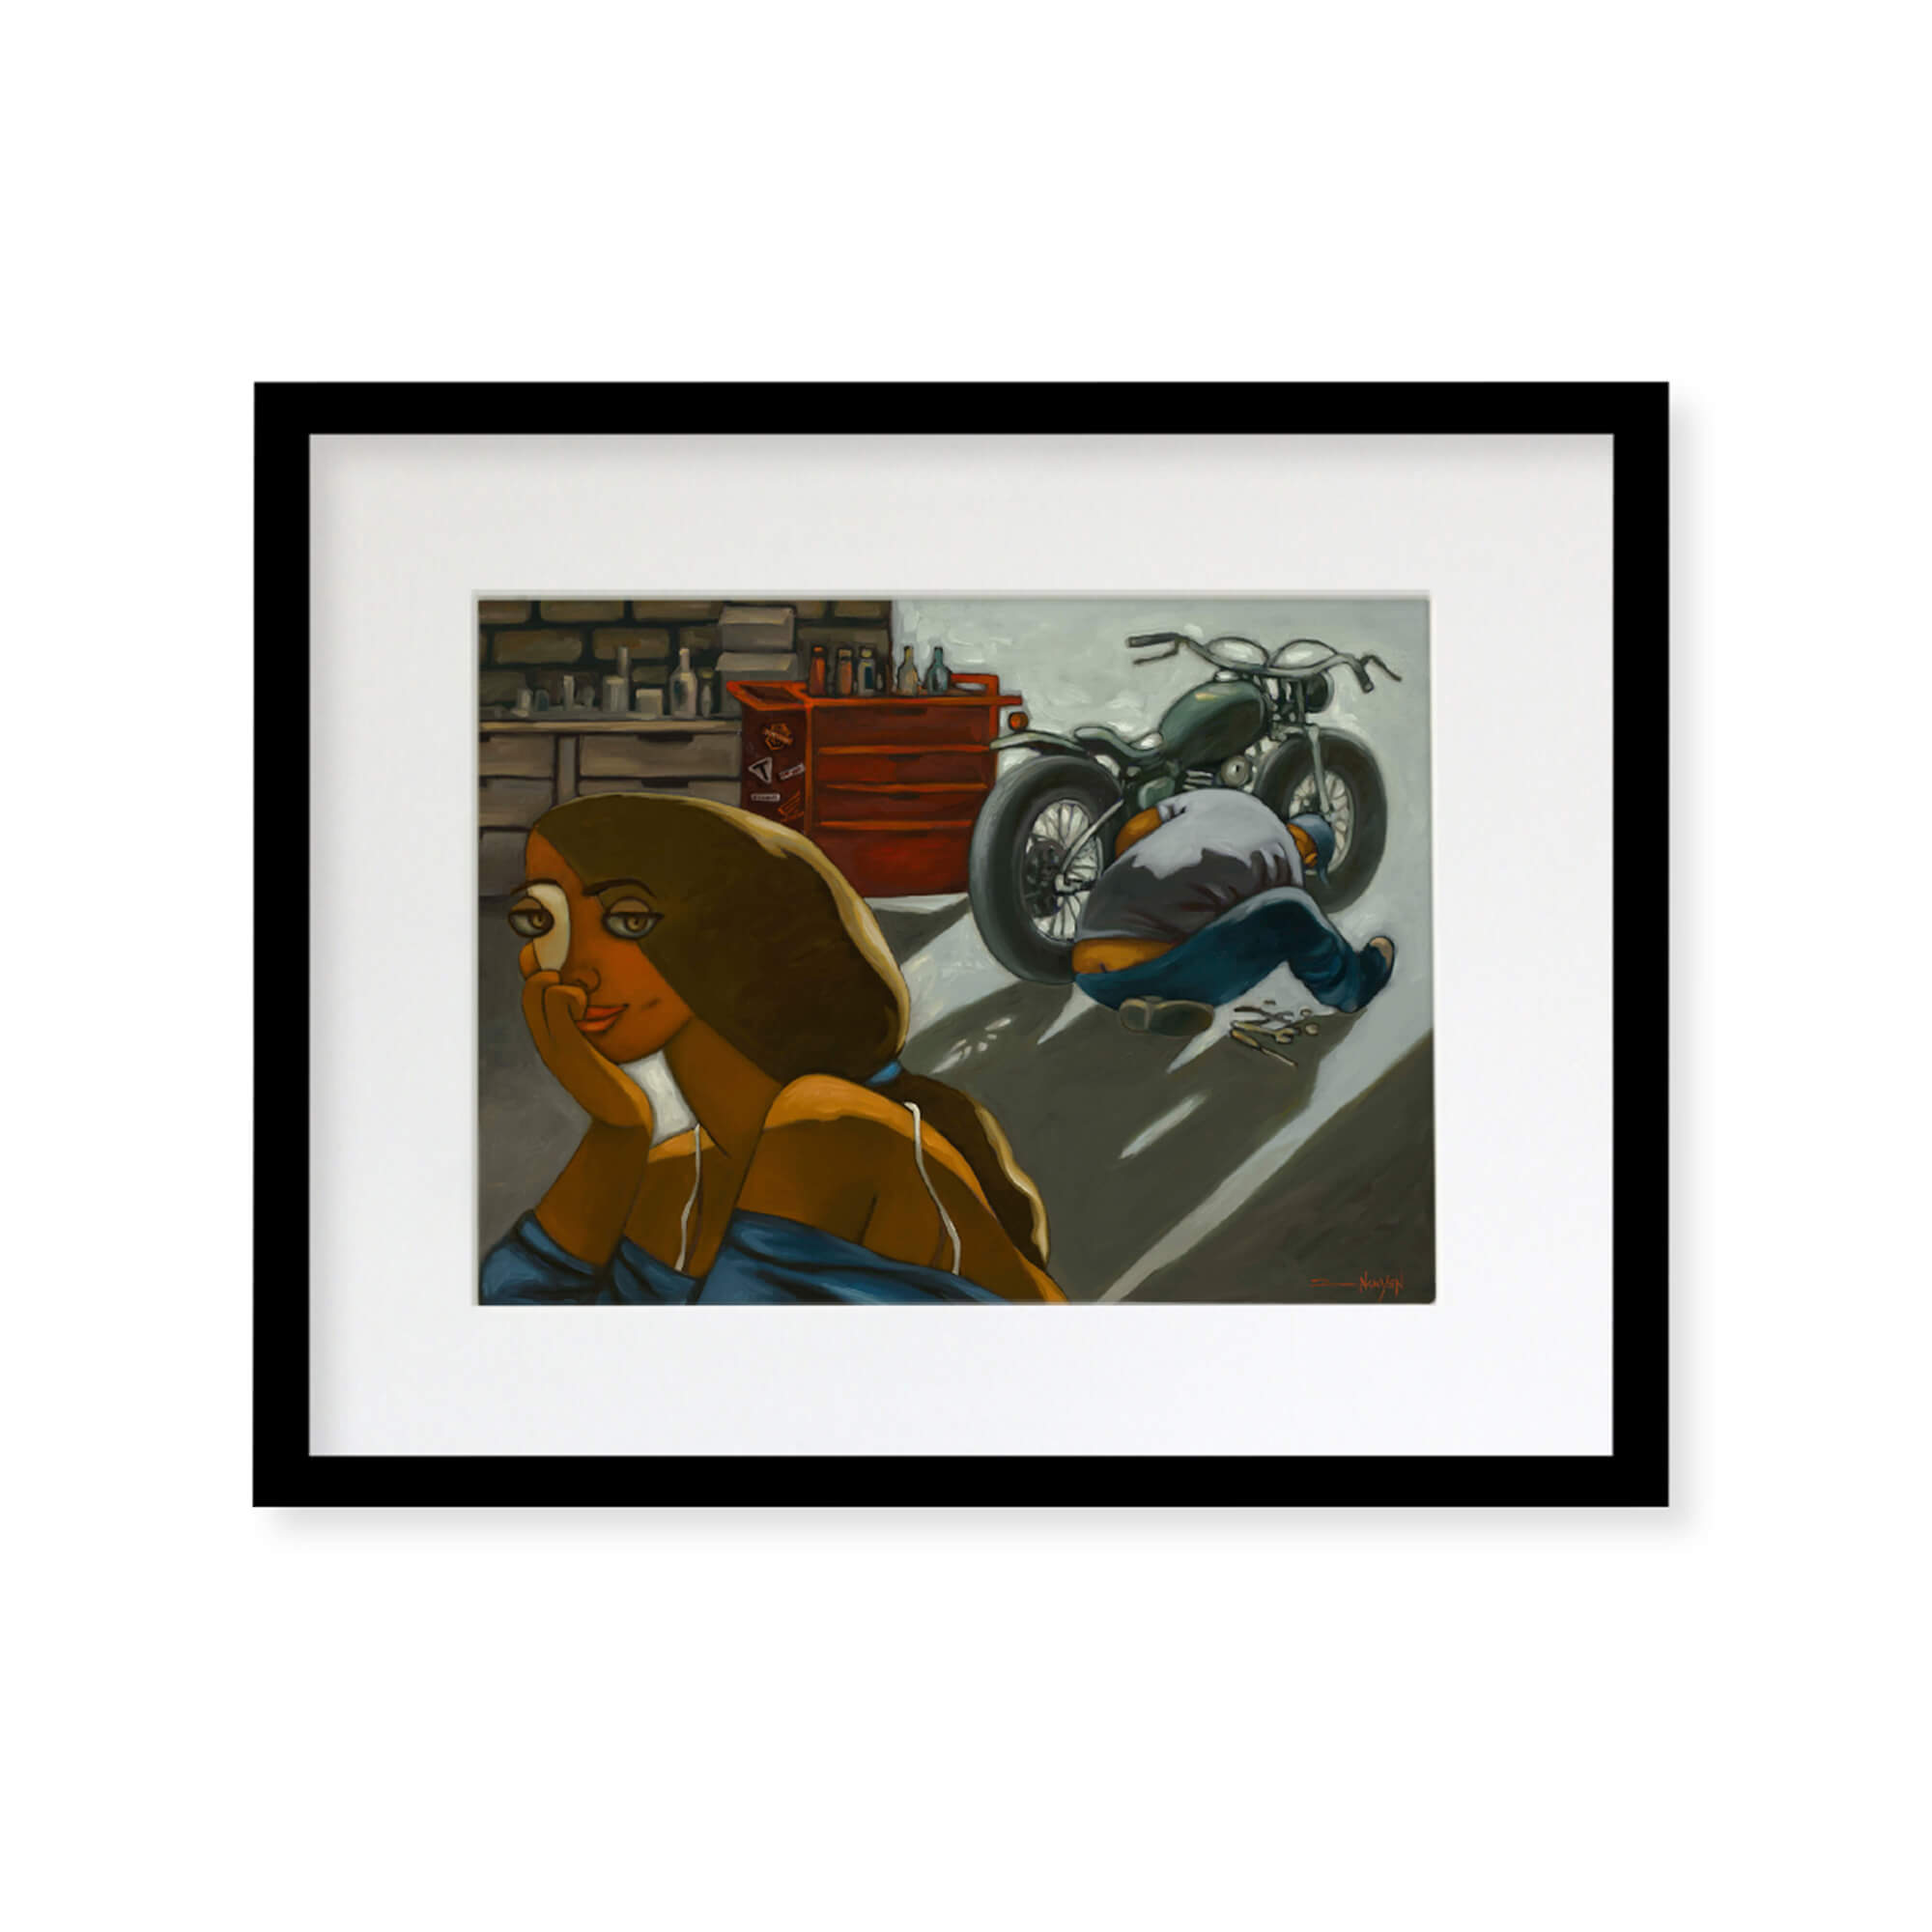 Framed matted art print of a woman and her vintage motorcycle in a mechanic shop by Hawaii artist Tim Nguyen